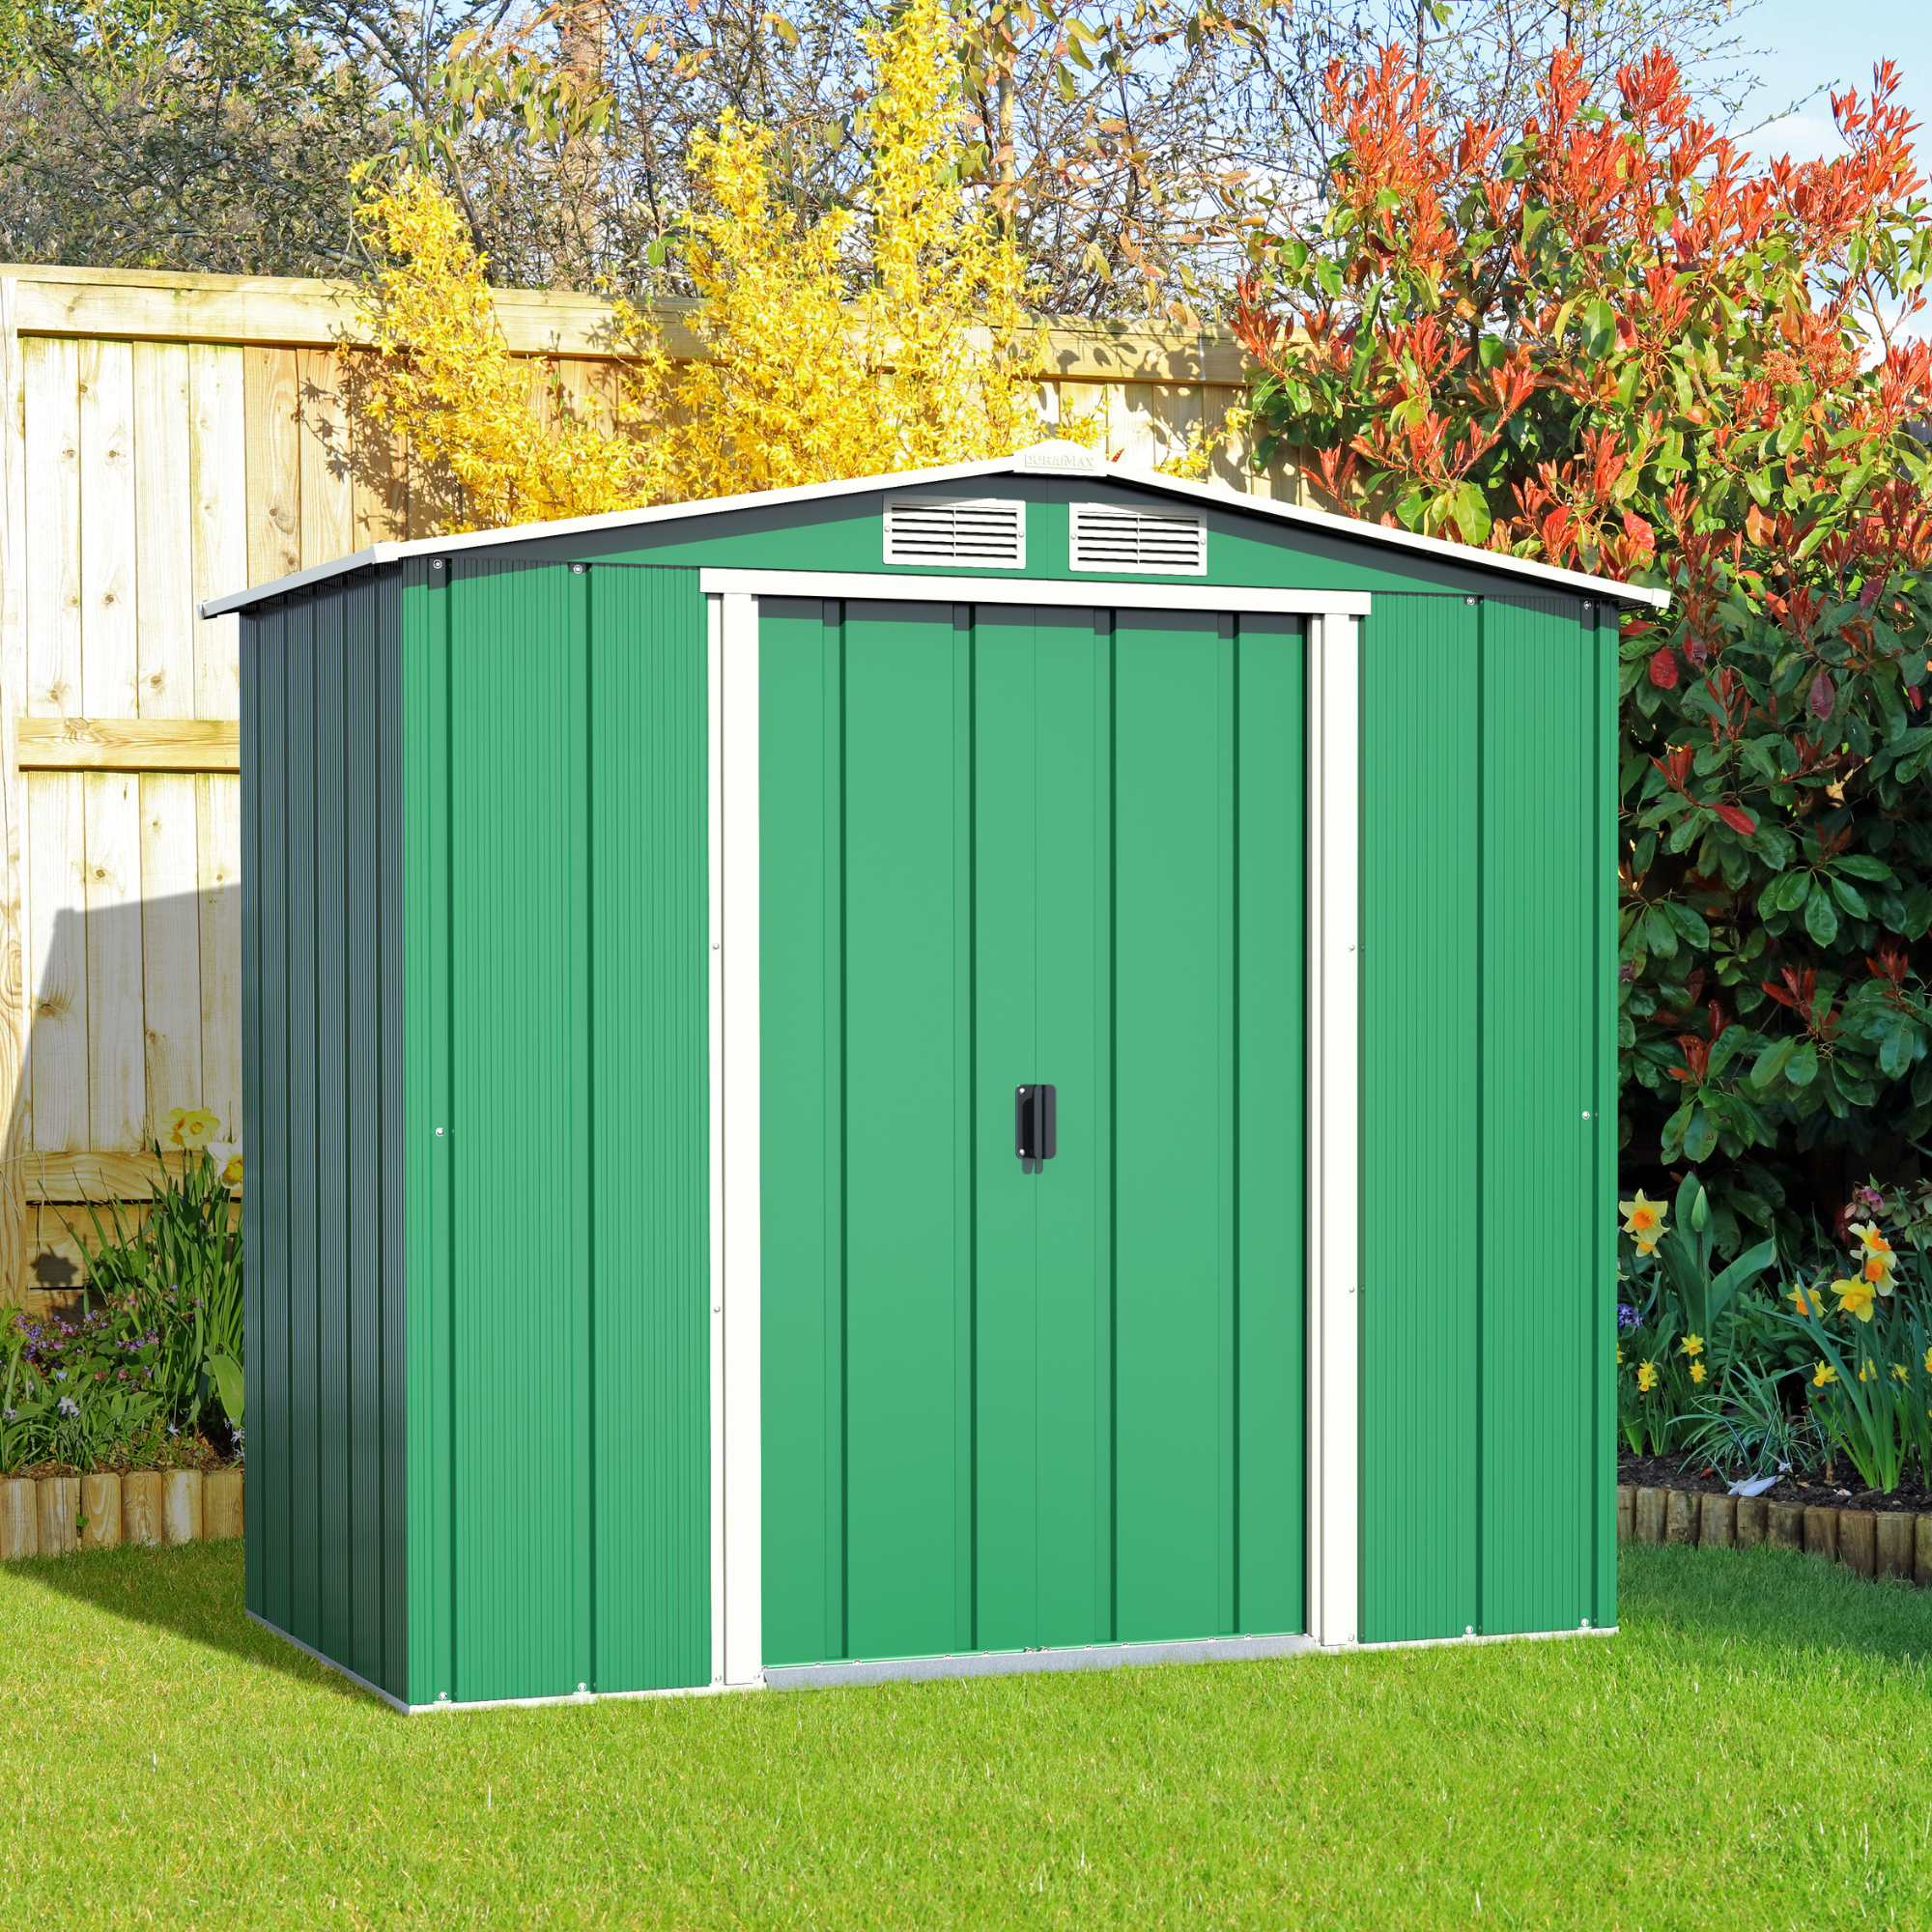 Image of BillyOh Partner Eco Apex Roof Metal Shed - 6x4 Apex Eco